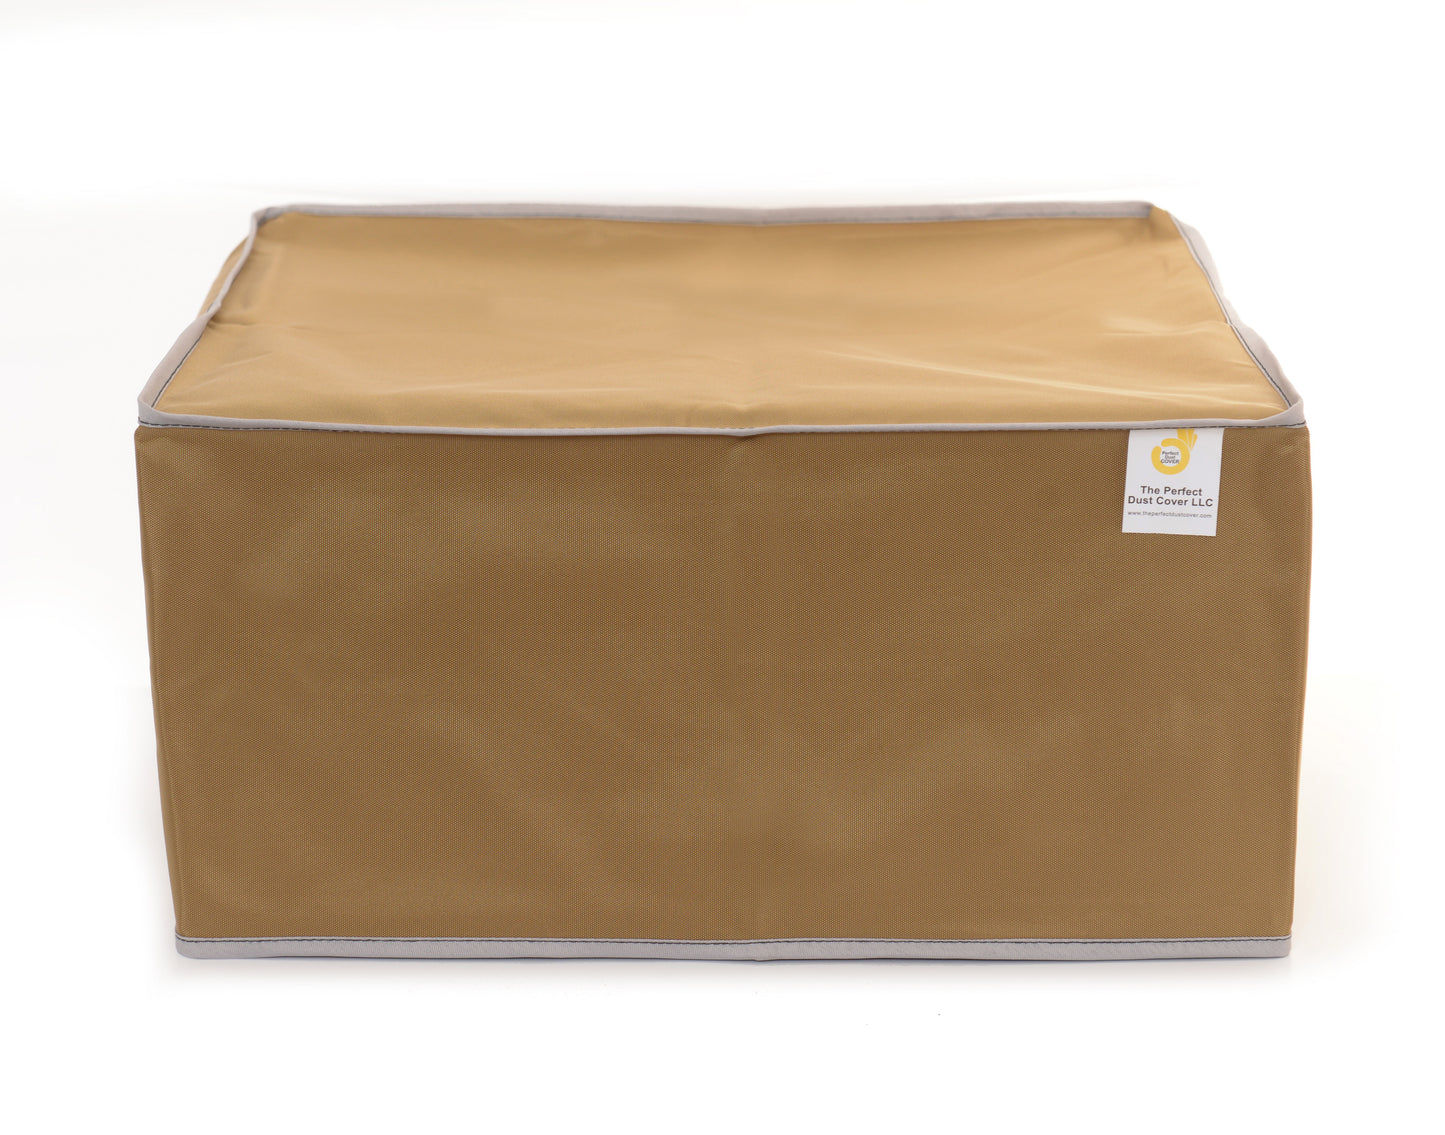 The Perfect Dust Cover, Tan Nylon Cover for HP Laserjet Pro MFP M428fdn Wireless Laser Printer, Anti Static and Waterproof Dimensions 16.54''W x 15.35''D x 12.72''H by The Perfect Dust Cover LLC